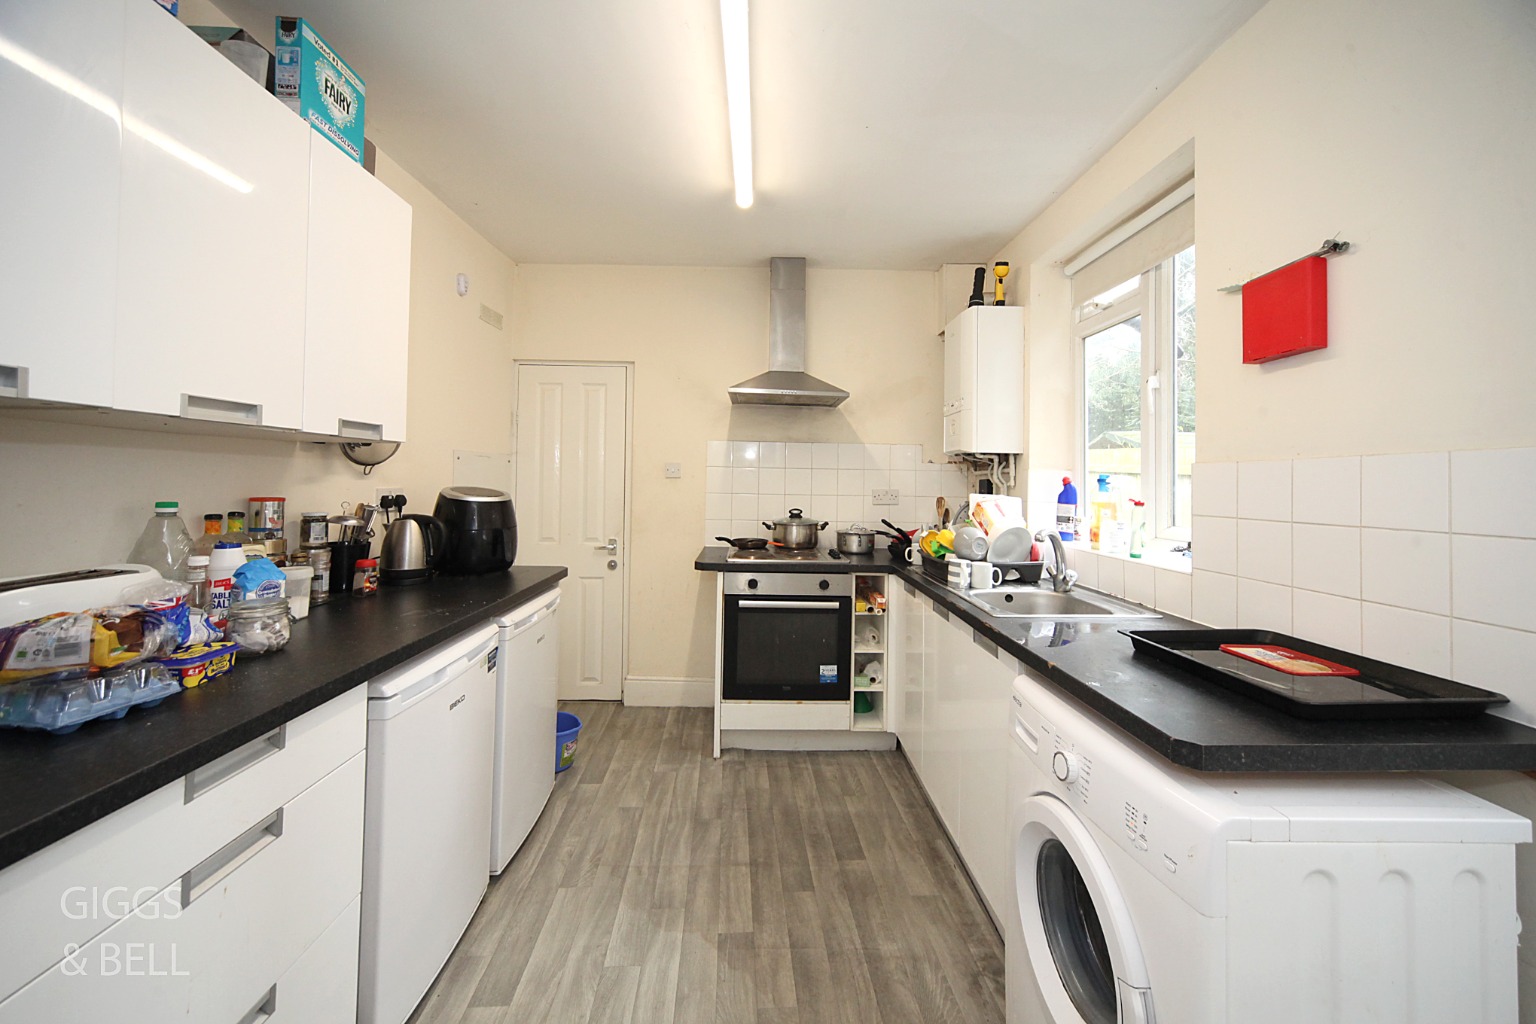 3 bed terraced house for sale in Talbot Road, Luton  - Property Image 2